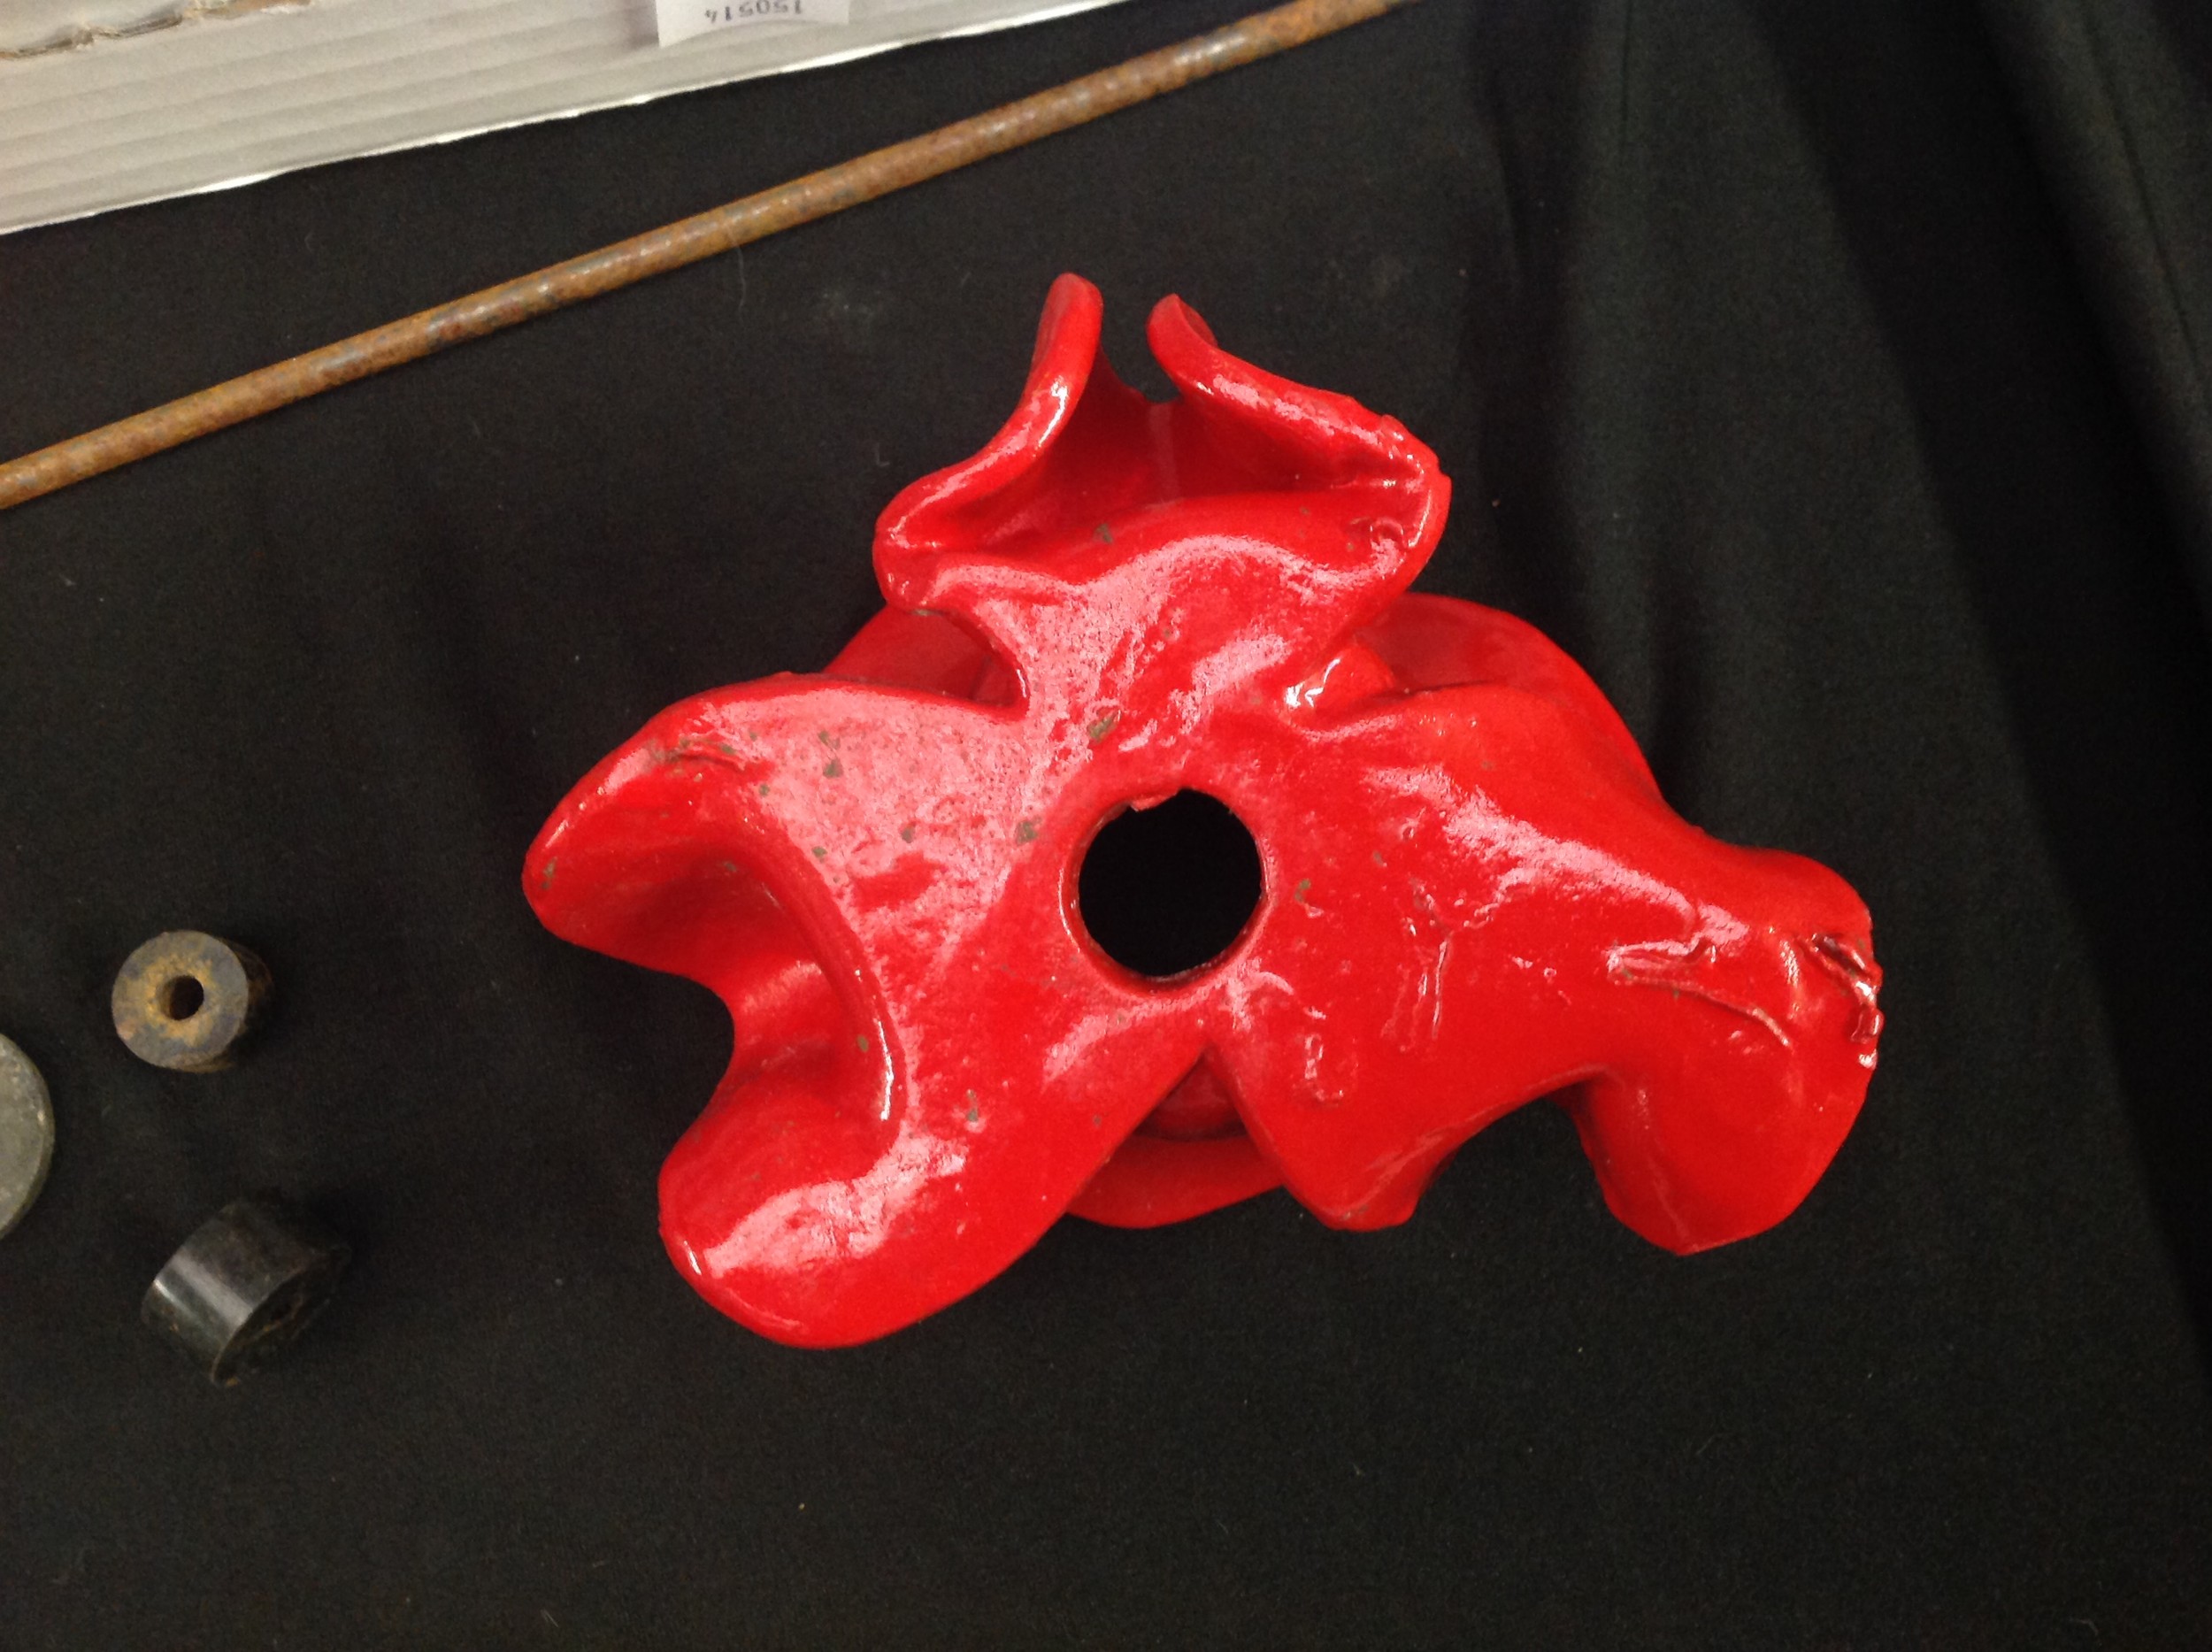 A Royal British Legion Centenary ceramic poppy by Paul Cummins made for the art installation at - Image 7 of 7